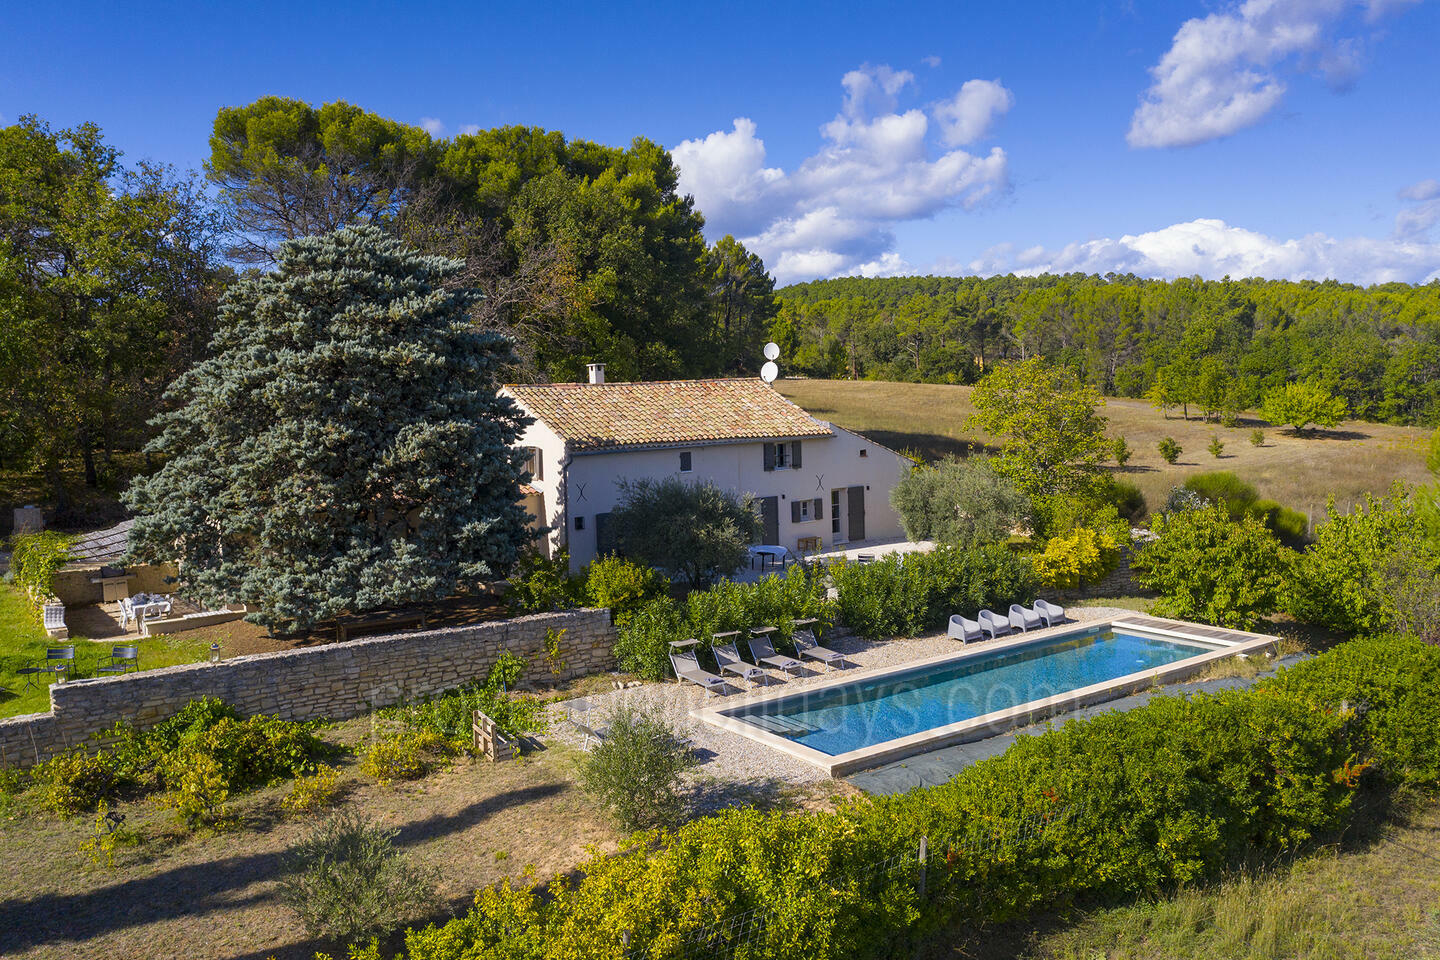 Recently Refurbished Holiday Rental in the Luberon 1 - Mas des Ocres: Villa: Pool